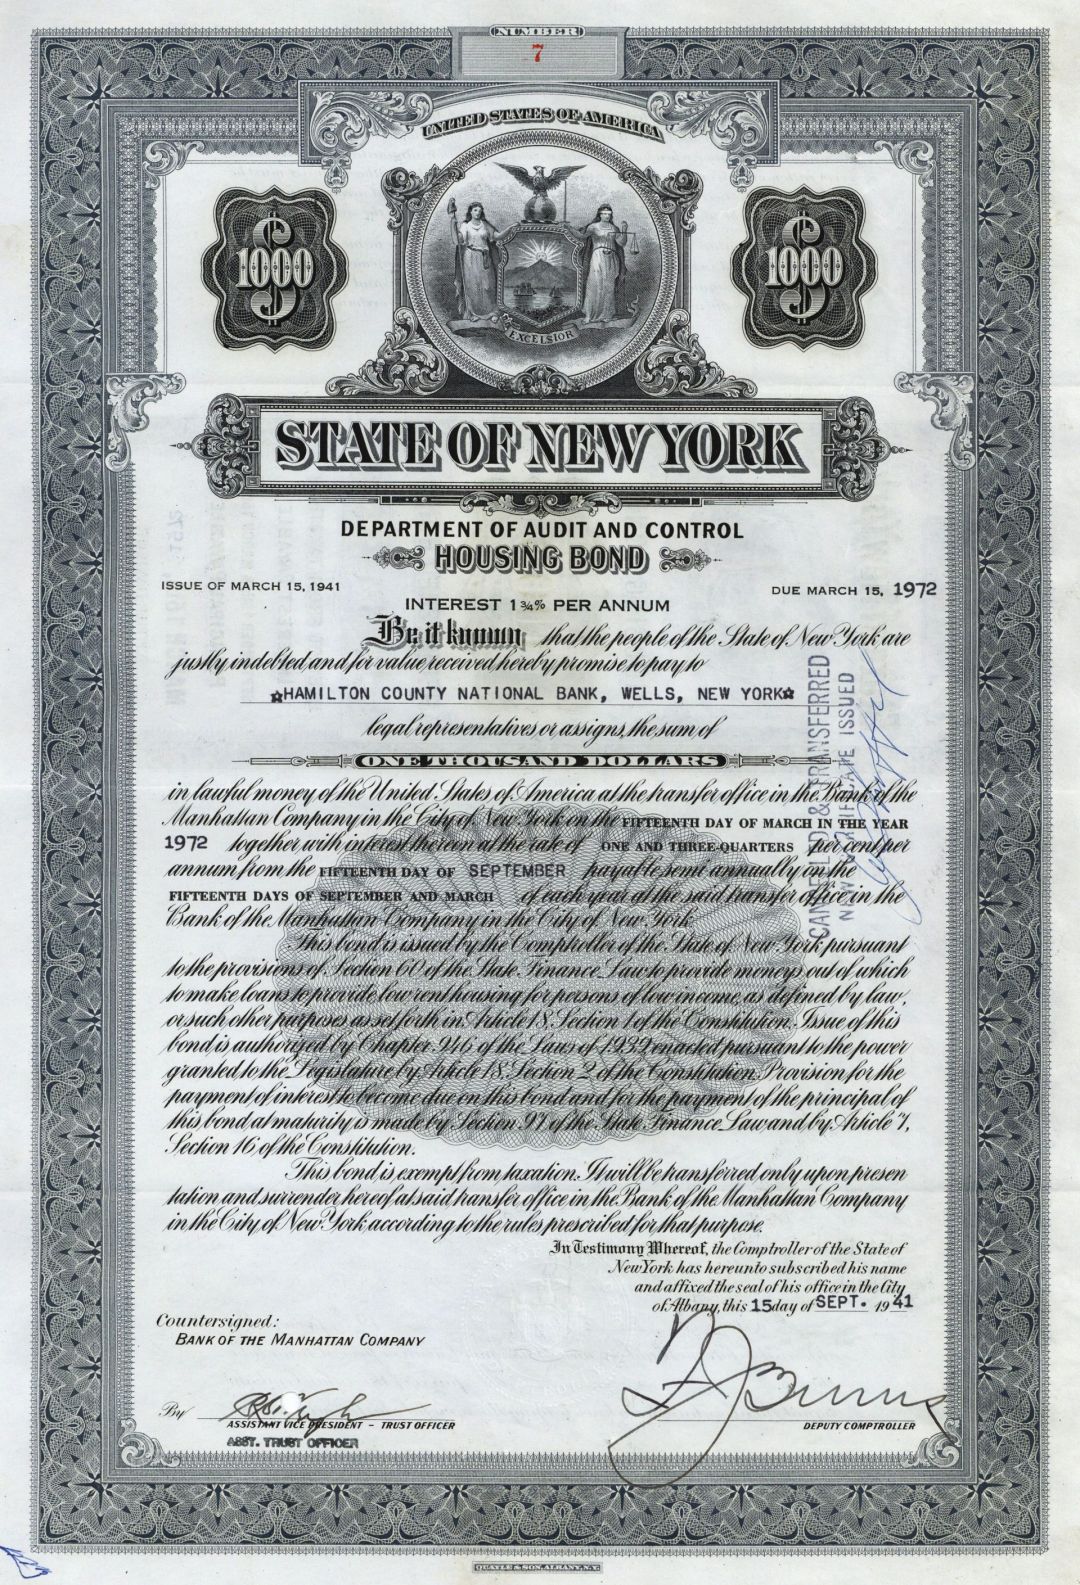 State of New York Bond dated 1941 - Department of Audit and Control - Housing Bond